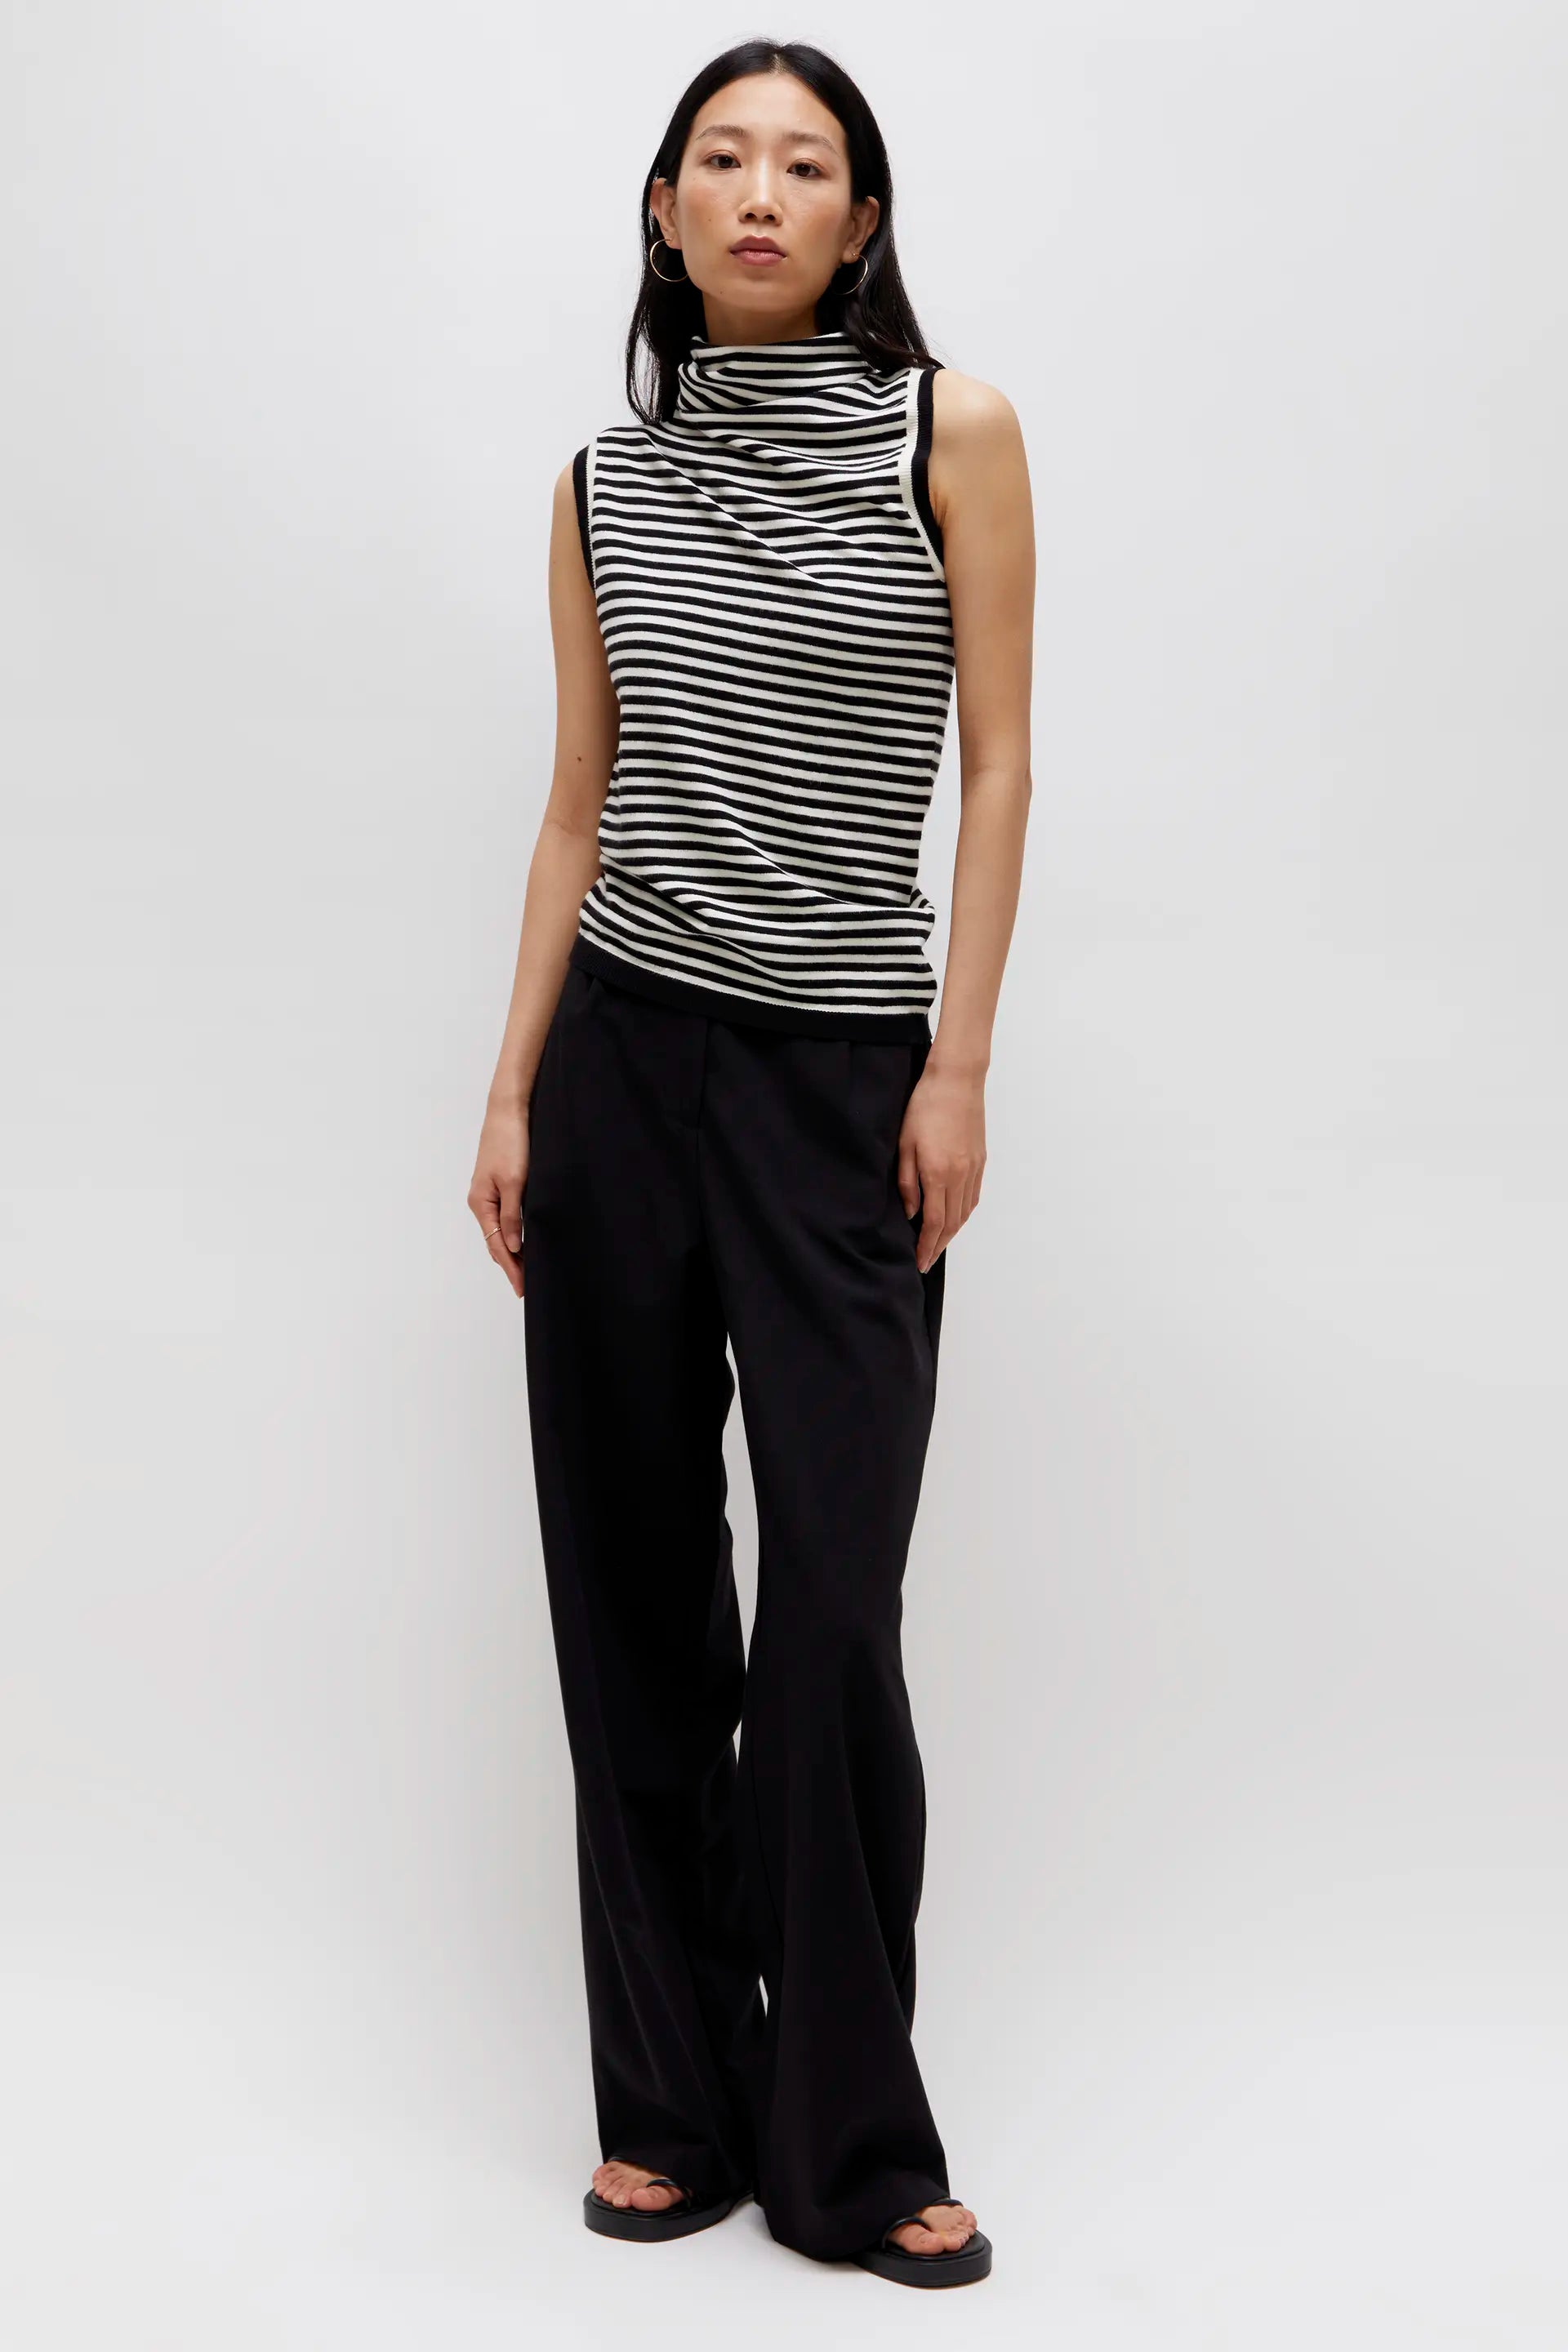 Wild Pony Sleeveless knit top with white stripes - clever alice